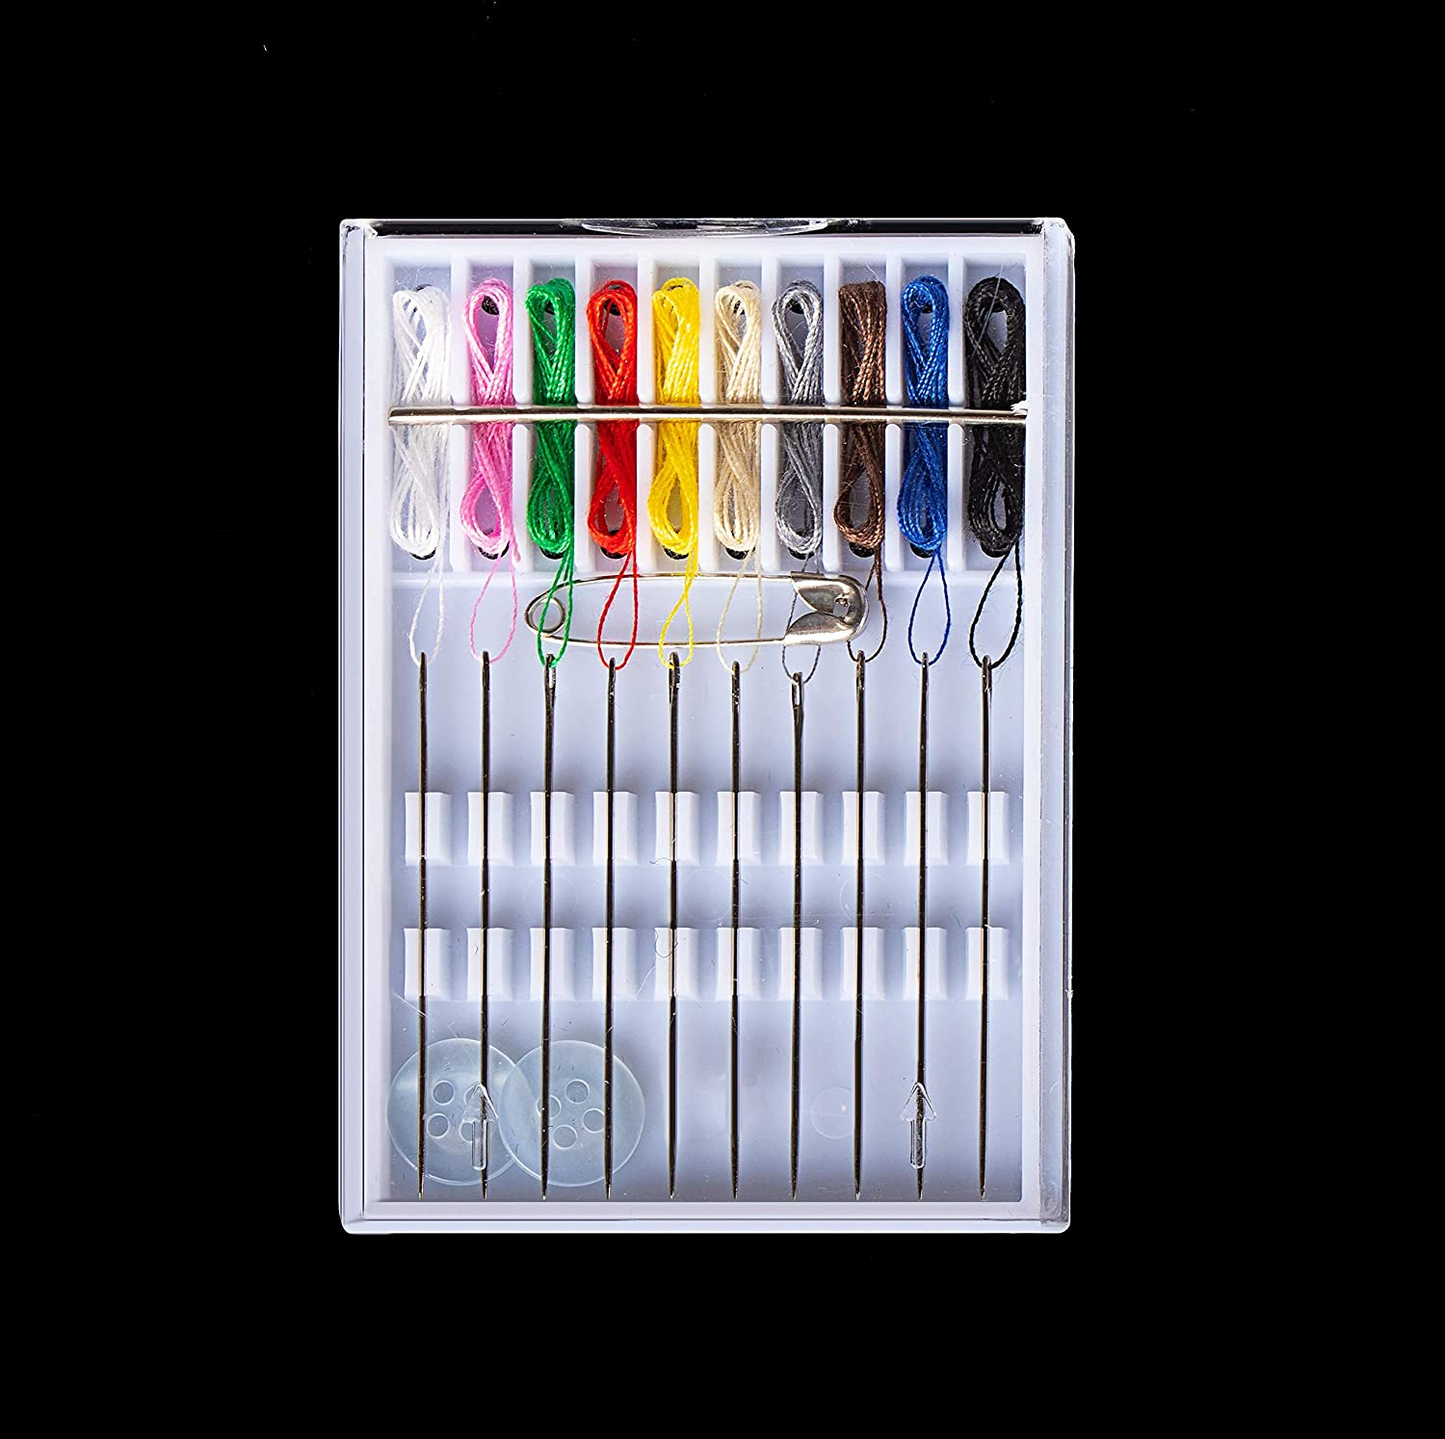 Sofire 10 Boxes Home and Travel Quick Fix Sewing Kit Pre Threaded Needle Kit, Each Box with 10 Pieces